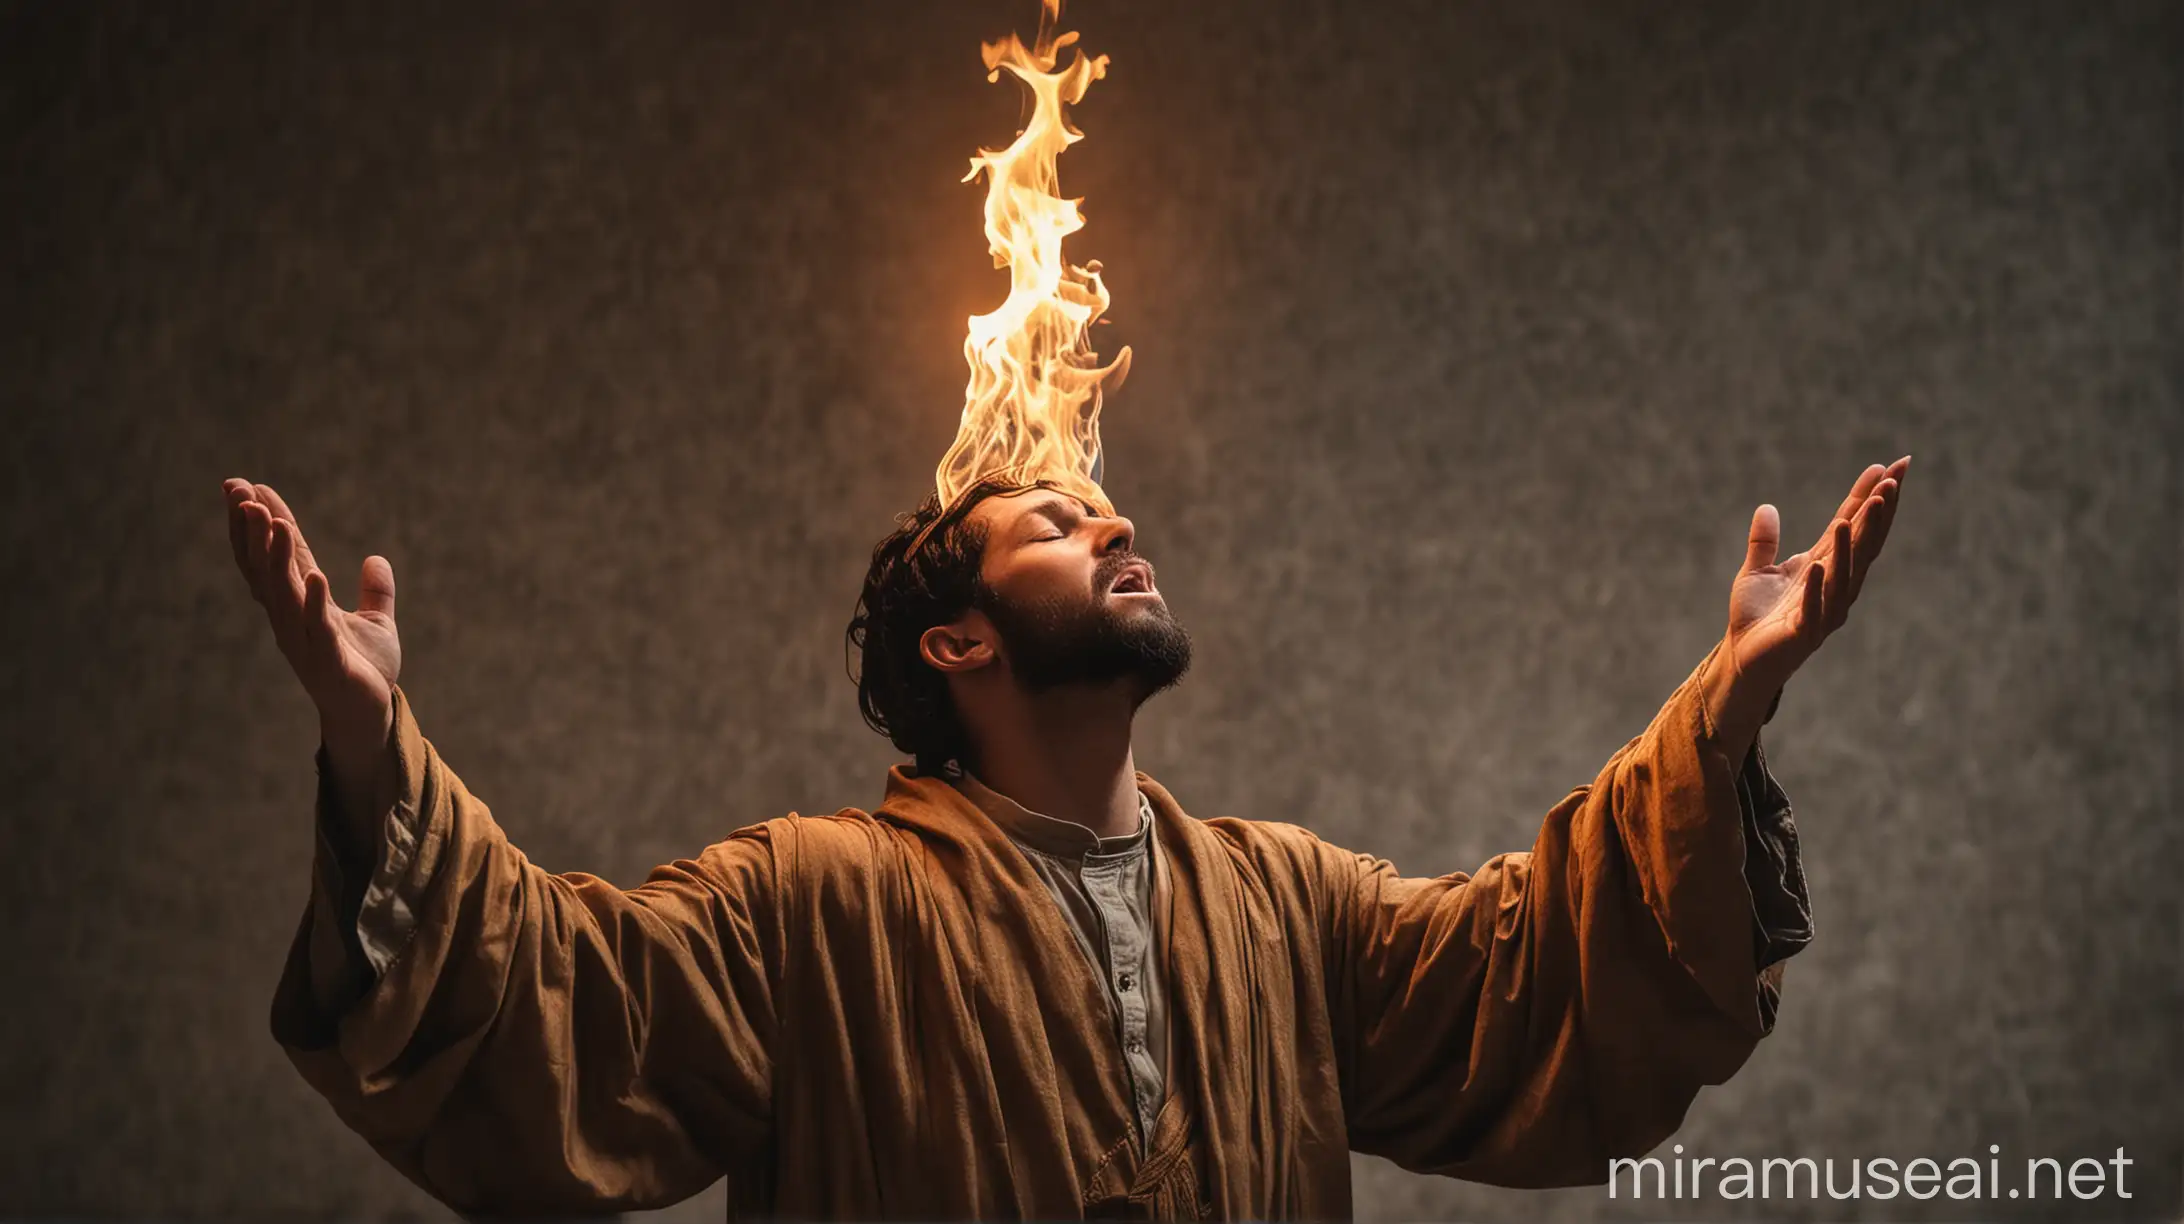 Biblical Figure Worshipping with Flame of Fire